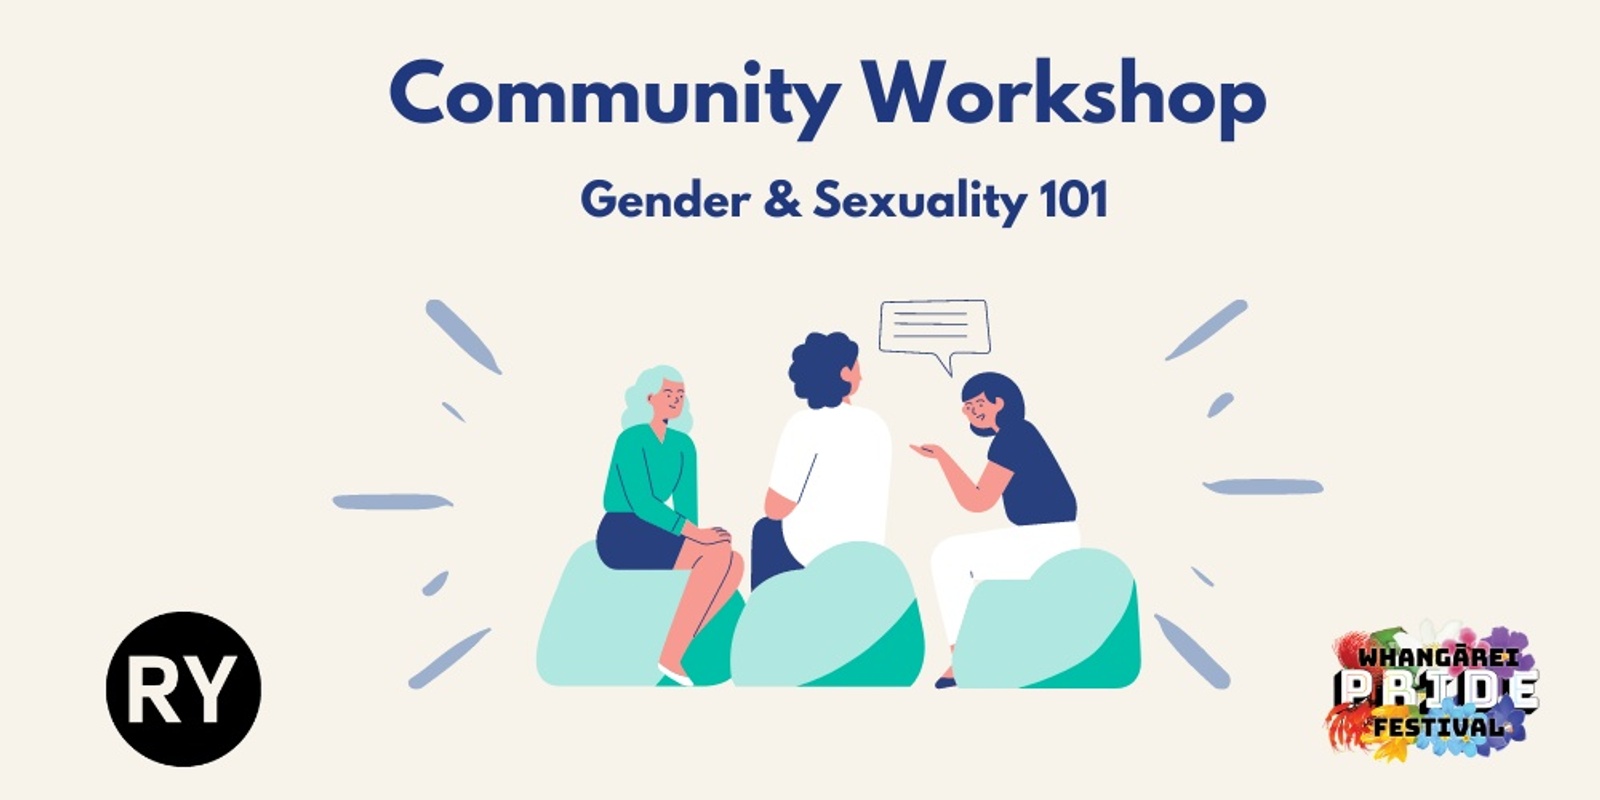 Banner image for Whangārei Community Workshop - Gender & Sexuality 101